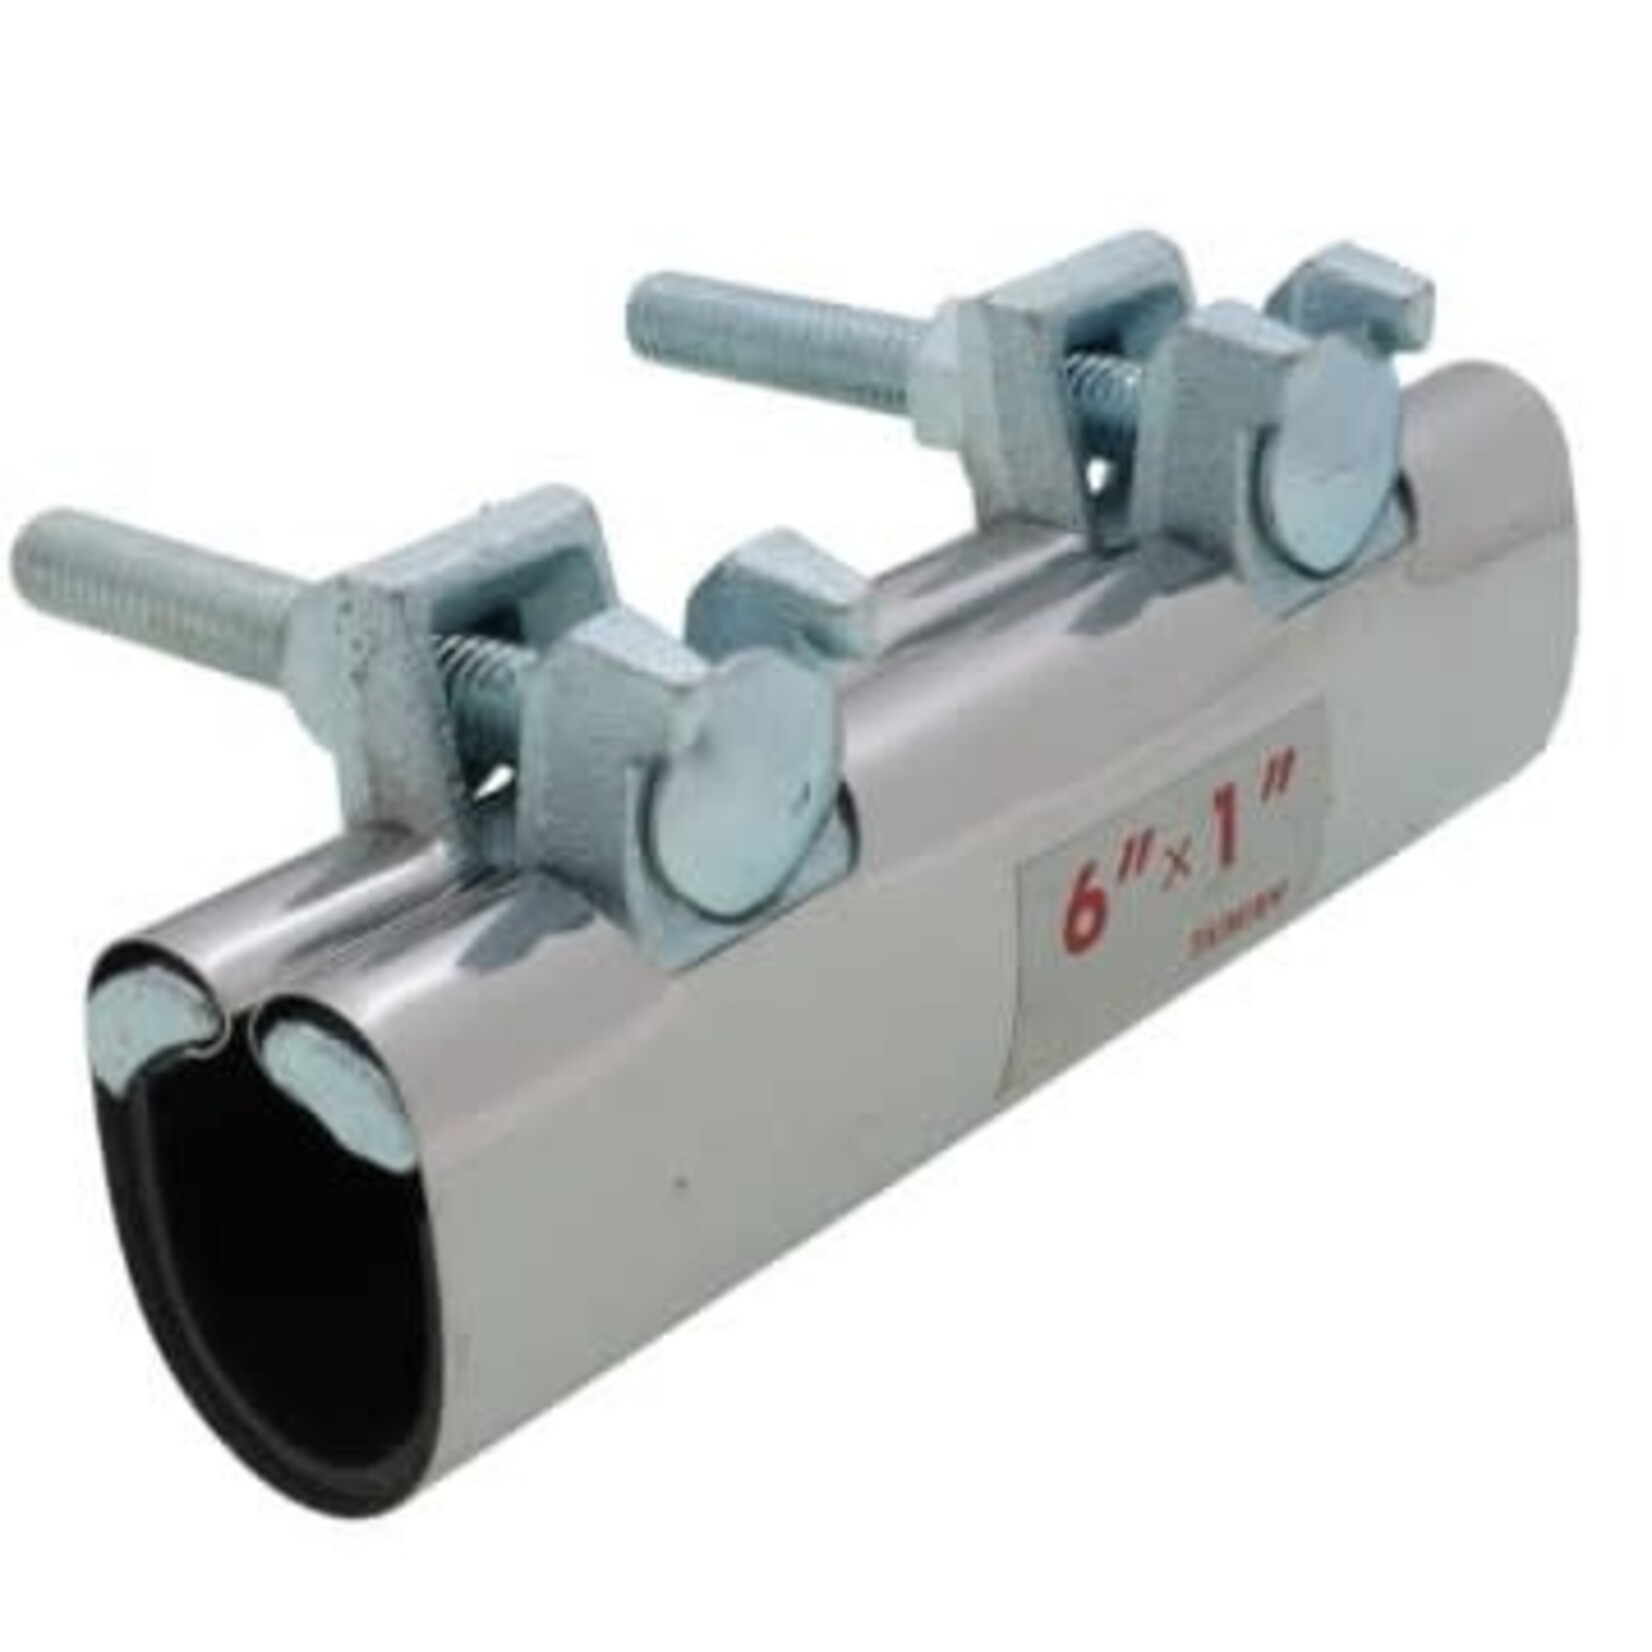 MATCO-NORCA 1 IN X 6 IN STAINLESS STEEL PIPE REPAIR CLAMP 2 BOLT